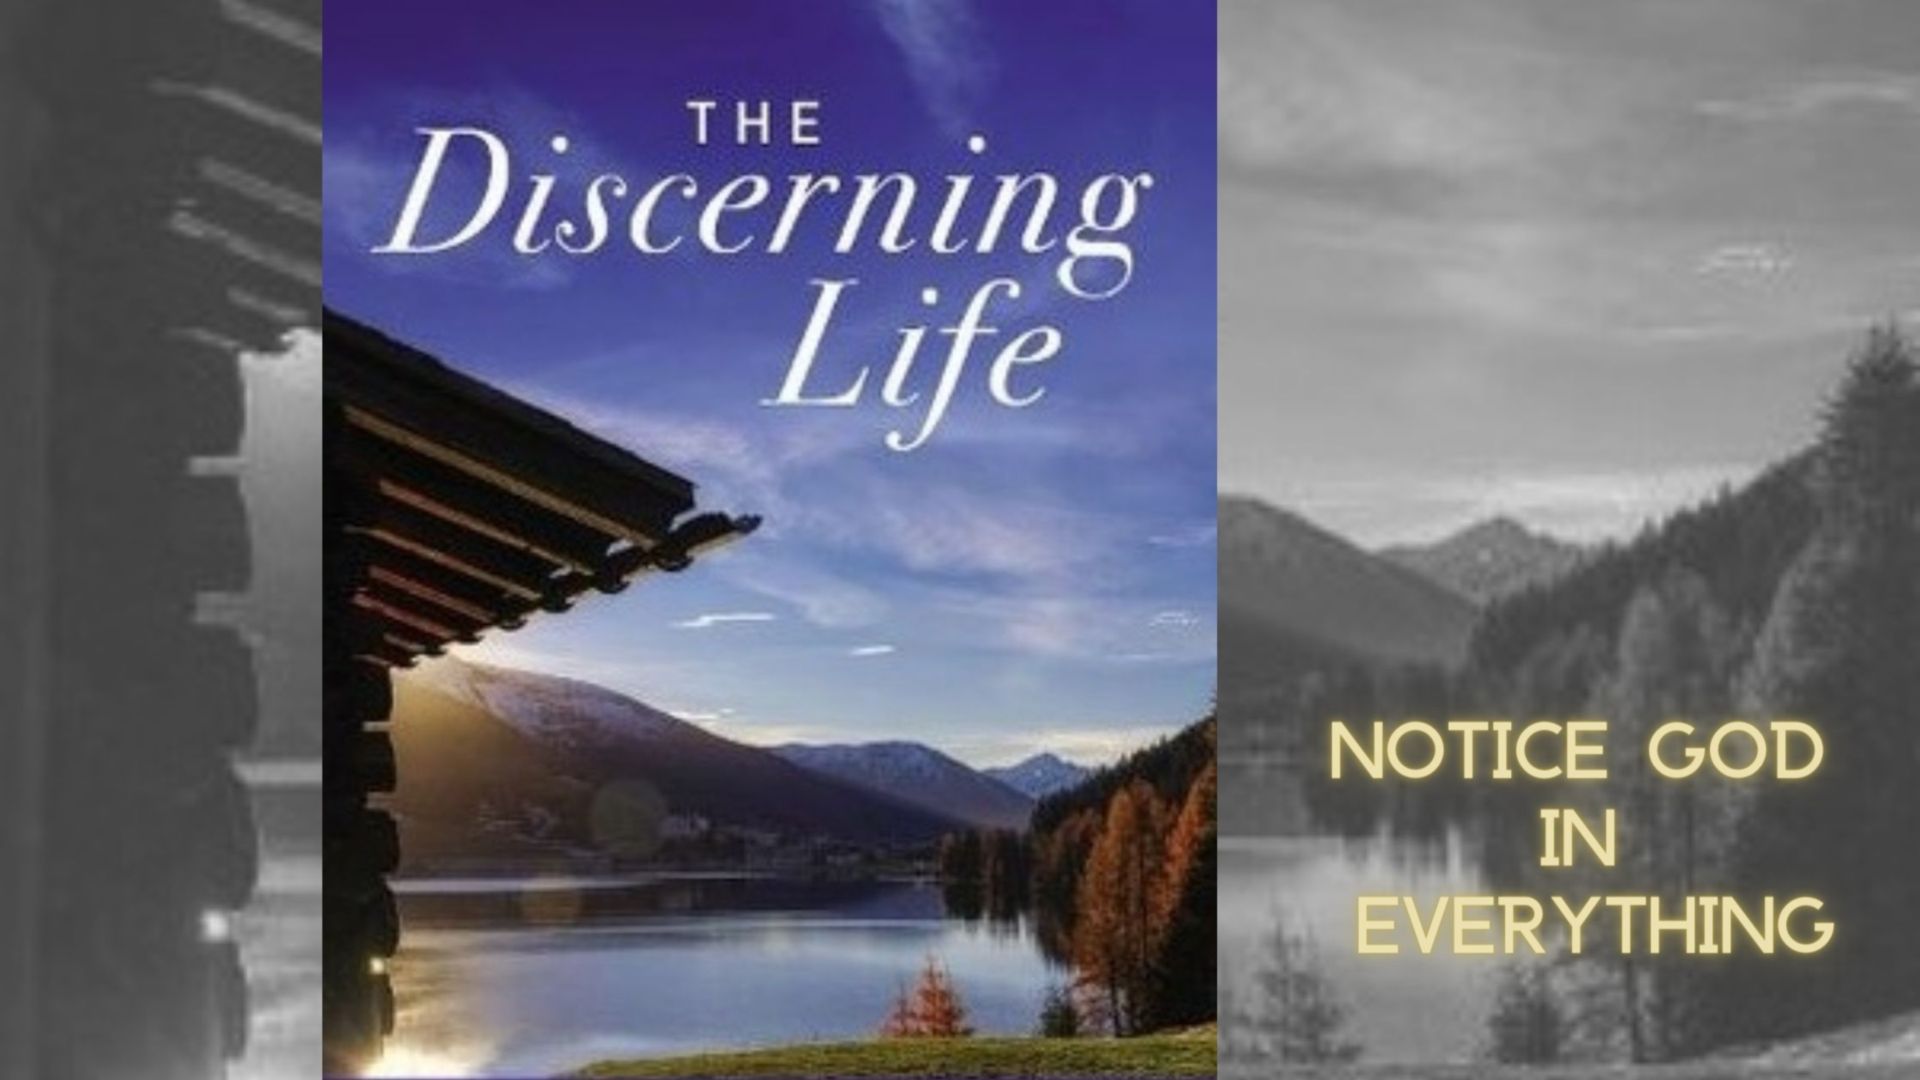 An interview with Stephen Macchia author of 'The Discerning Life'